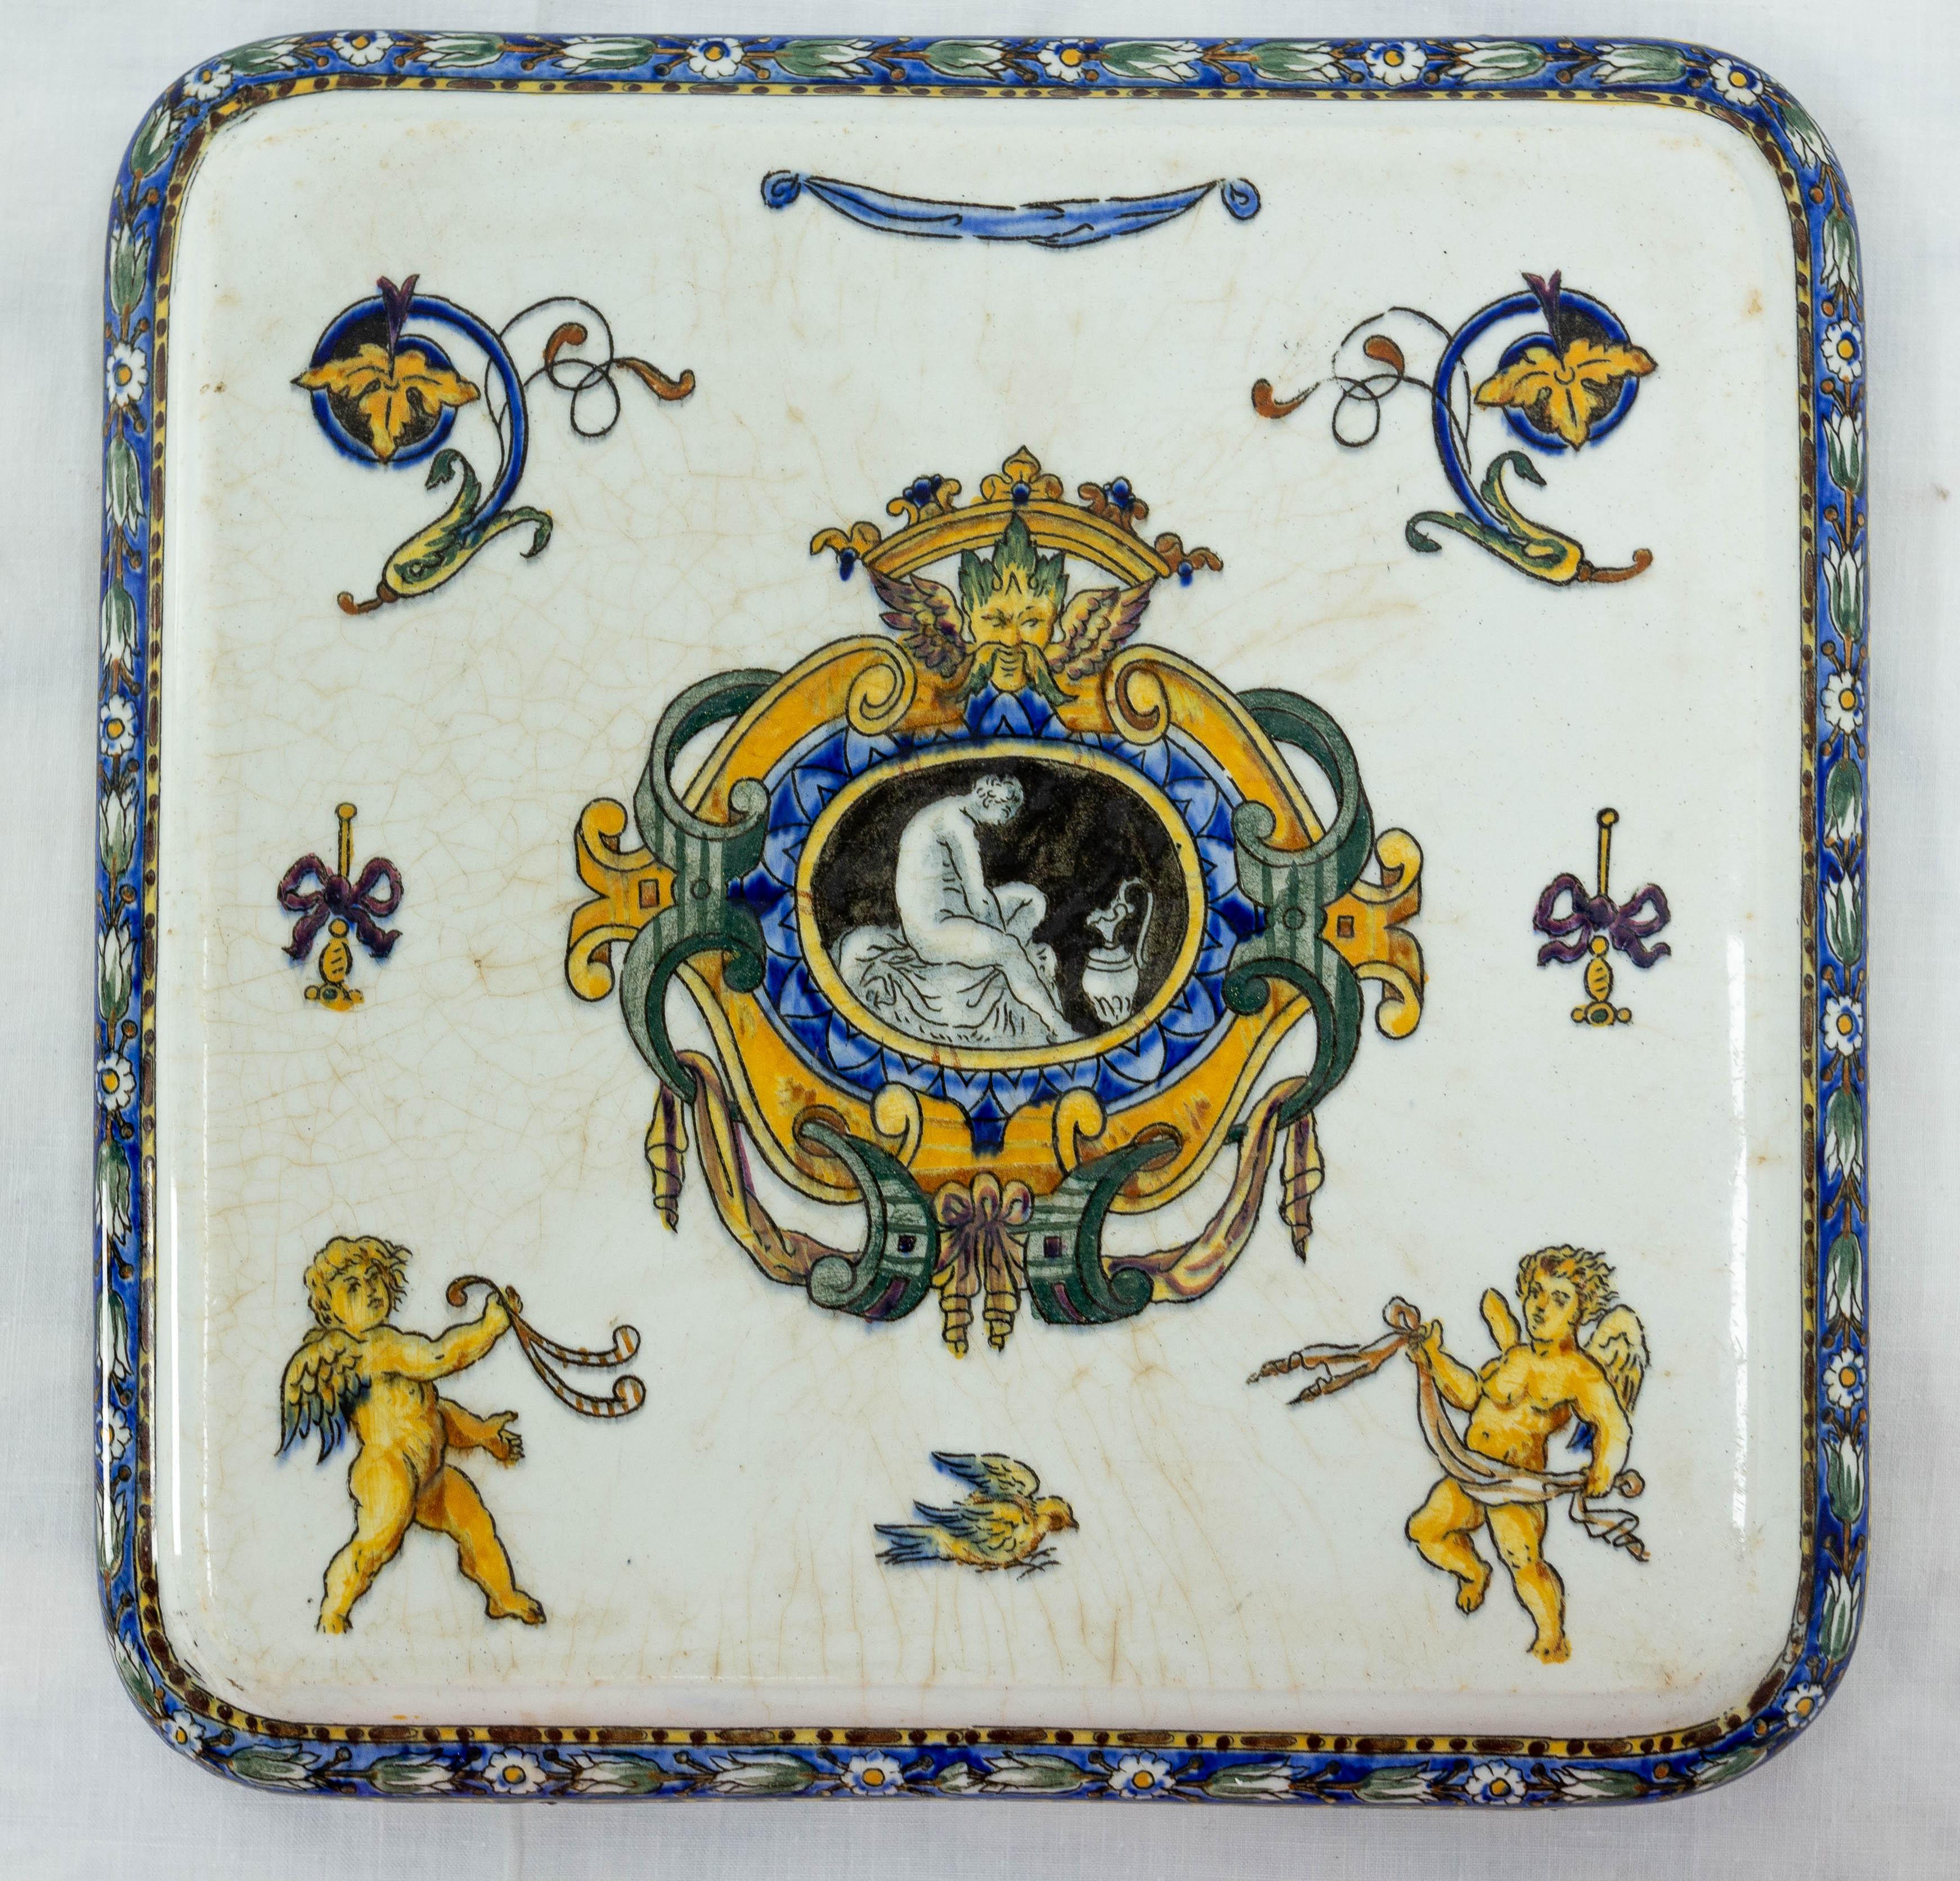 French Faience de Gien trivet or coaster.
Vegetal decor with two angel and a bird, in the Italian renaissance style.
The earthenware factory of Gien or the earthenware factory of Gien is a fine earthenware manufacturing company located in the